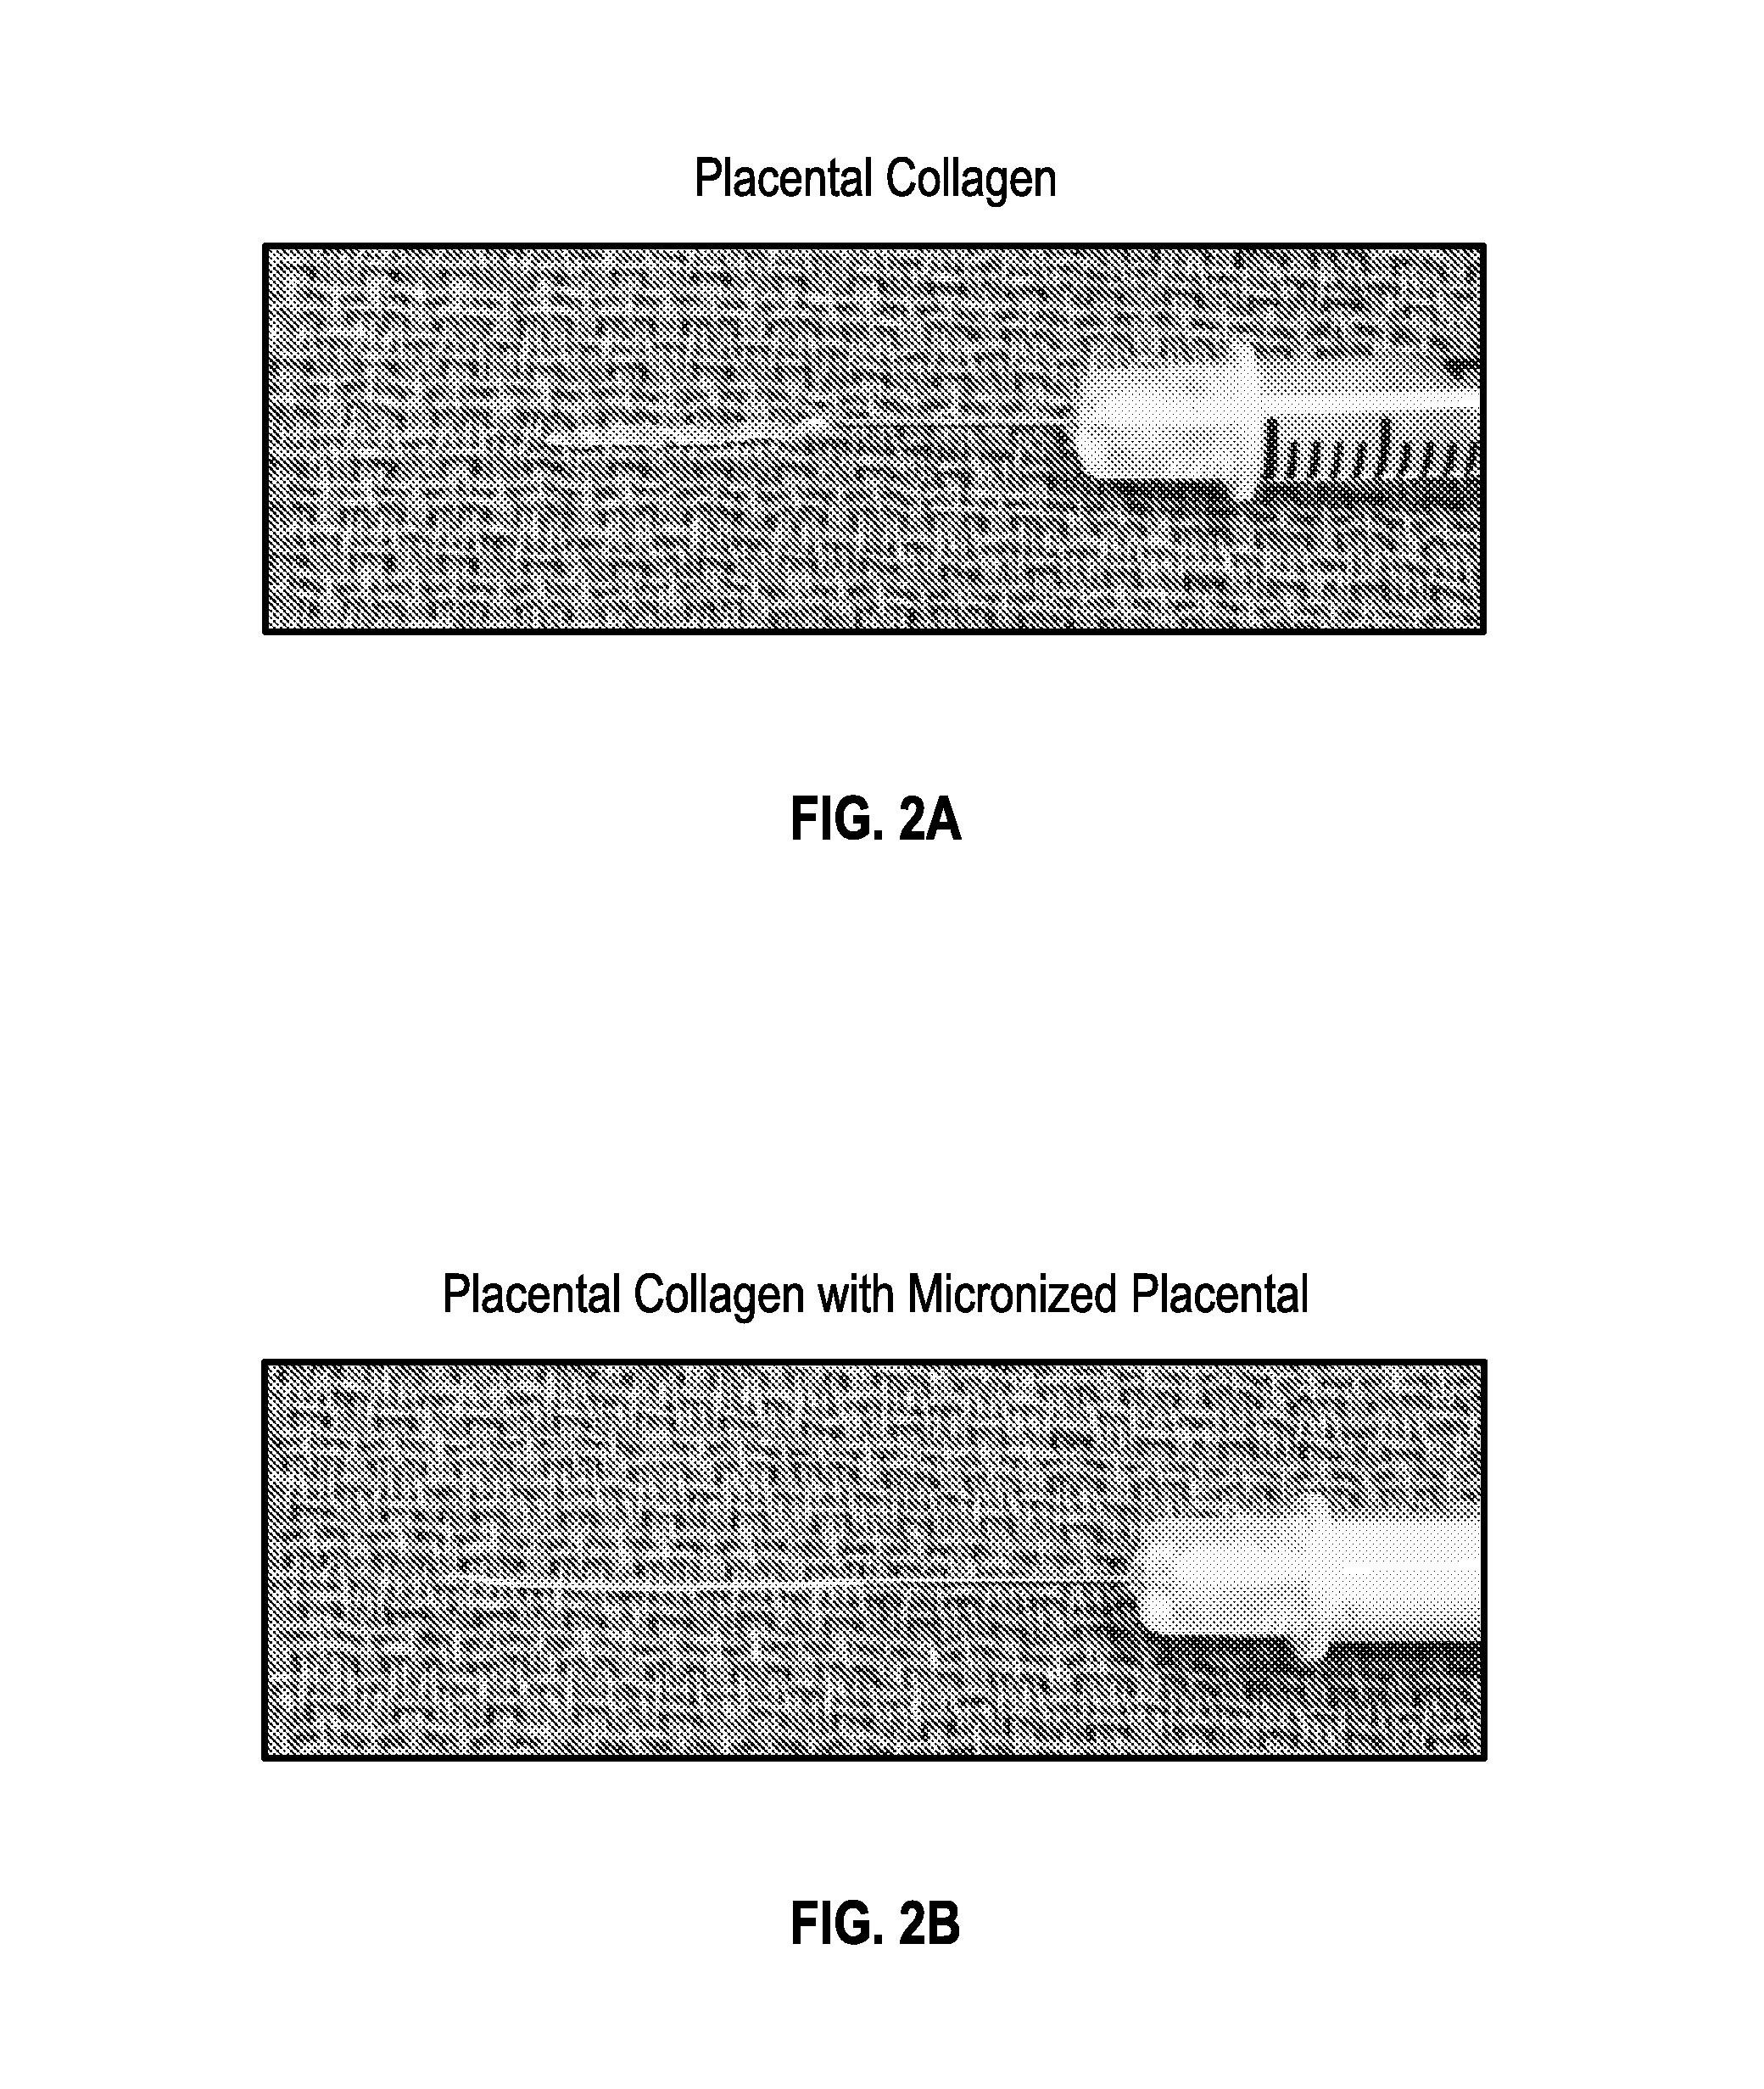 Collagen and micronized placental tissue compositions and methods of making and using the same